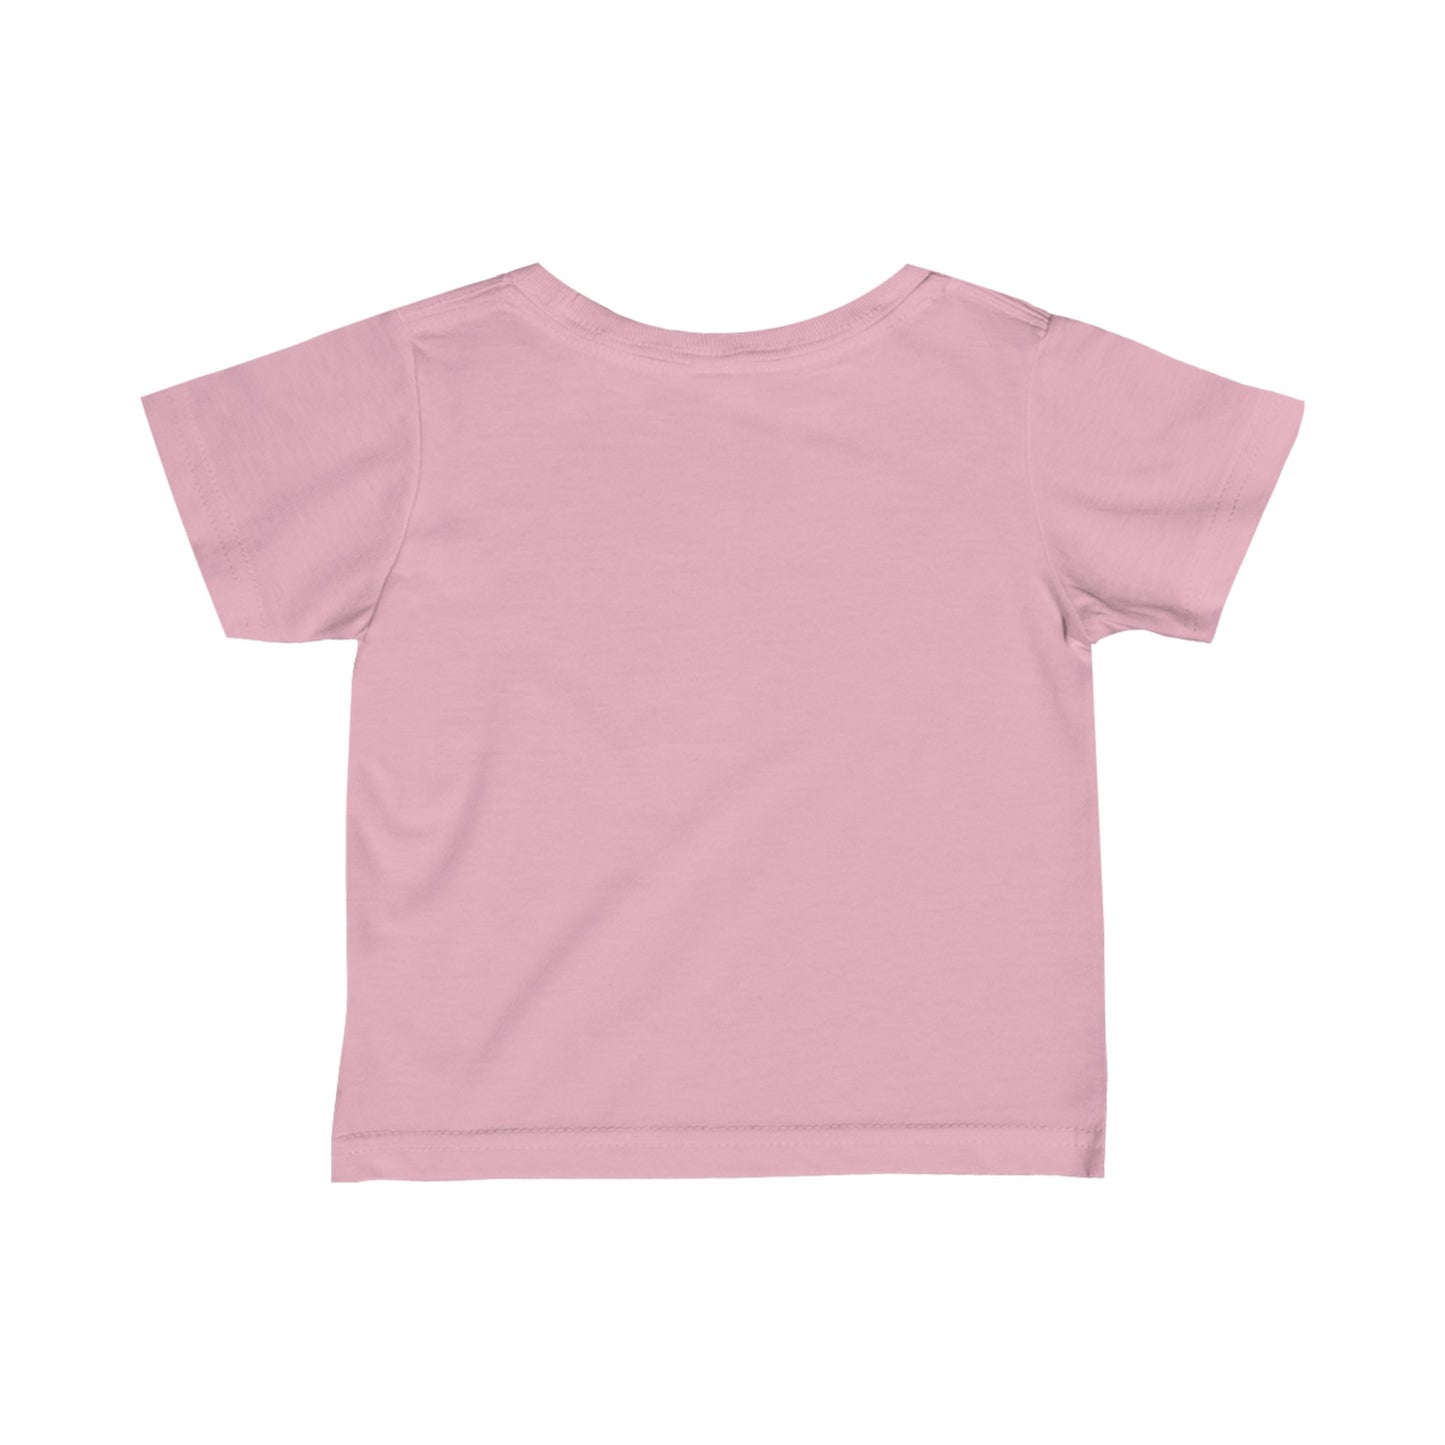 'Under the Sea' Infant Fine Jersey Tee